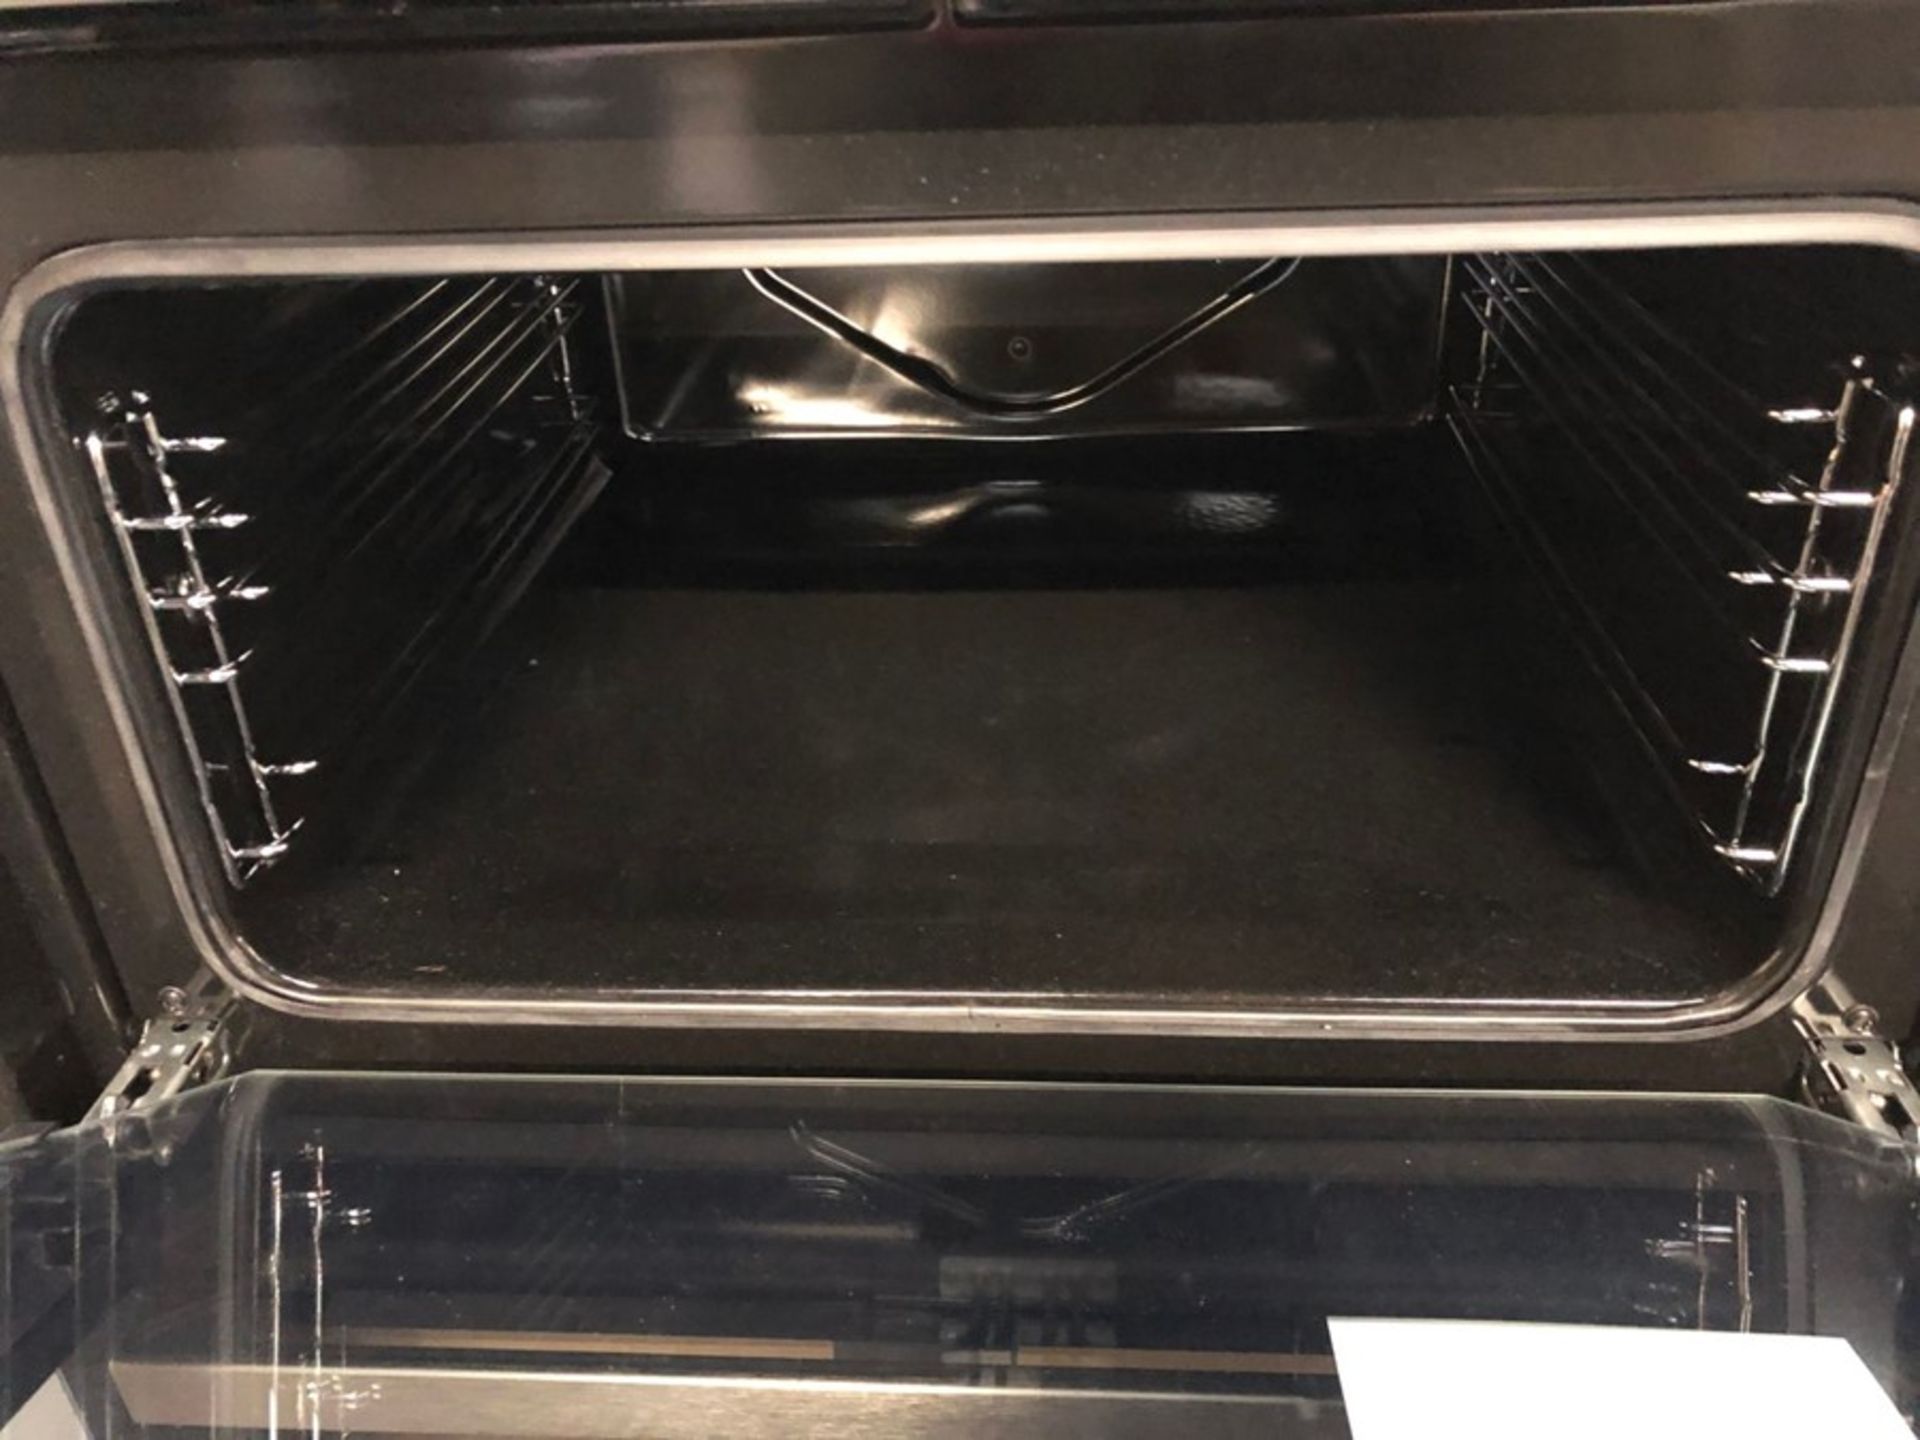 ZANUSSI ZOD35661XK BUILT-IN MULTIFUNCTION ELECTRIC DOUBLE OVEN - Image 4 of 4